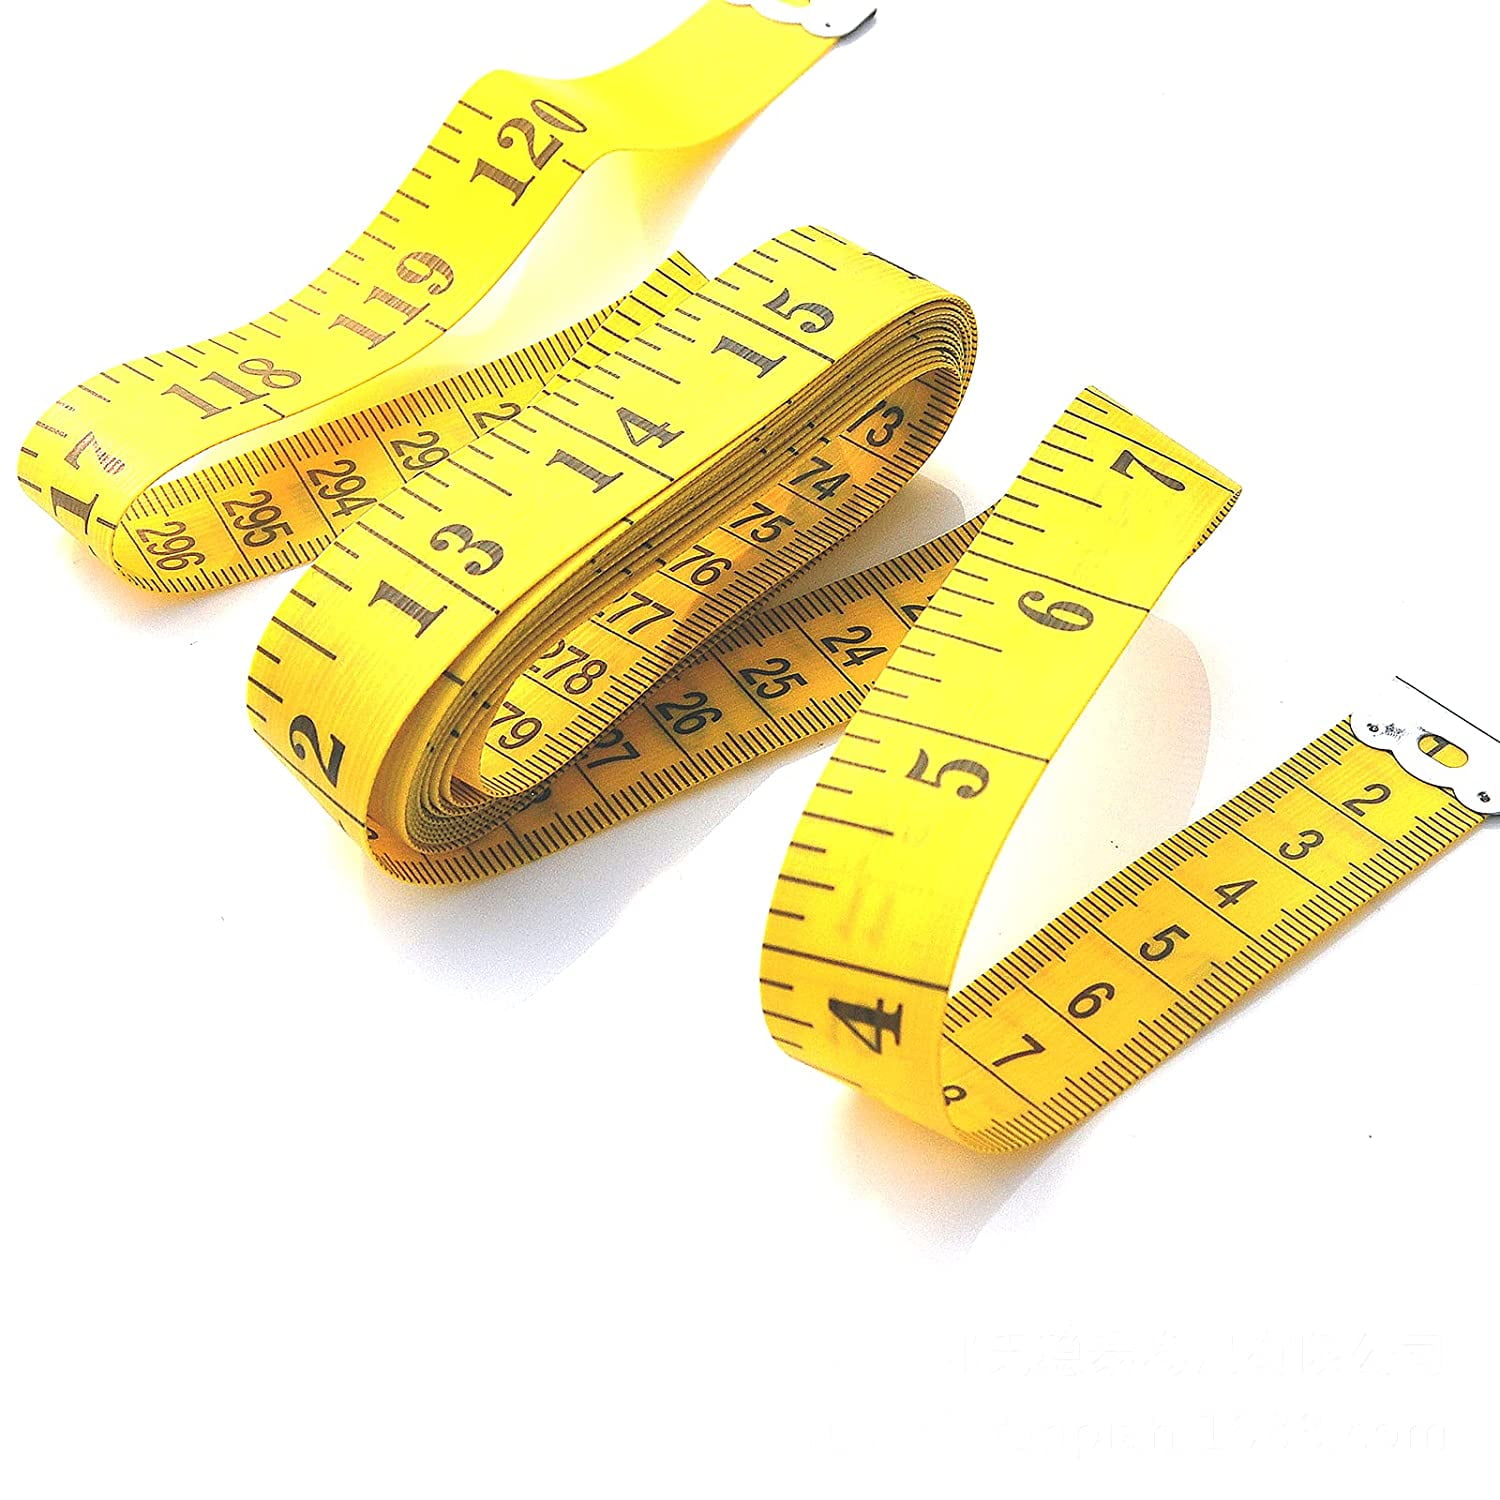 Z 3m/120 Tape Measure Body Measuring Tape for Body Cloth Tape Measure for  Sewing Fabric Tailors Medical Measurements Tape Dual